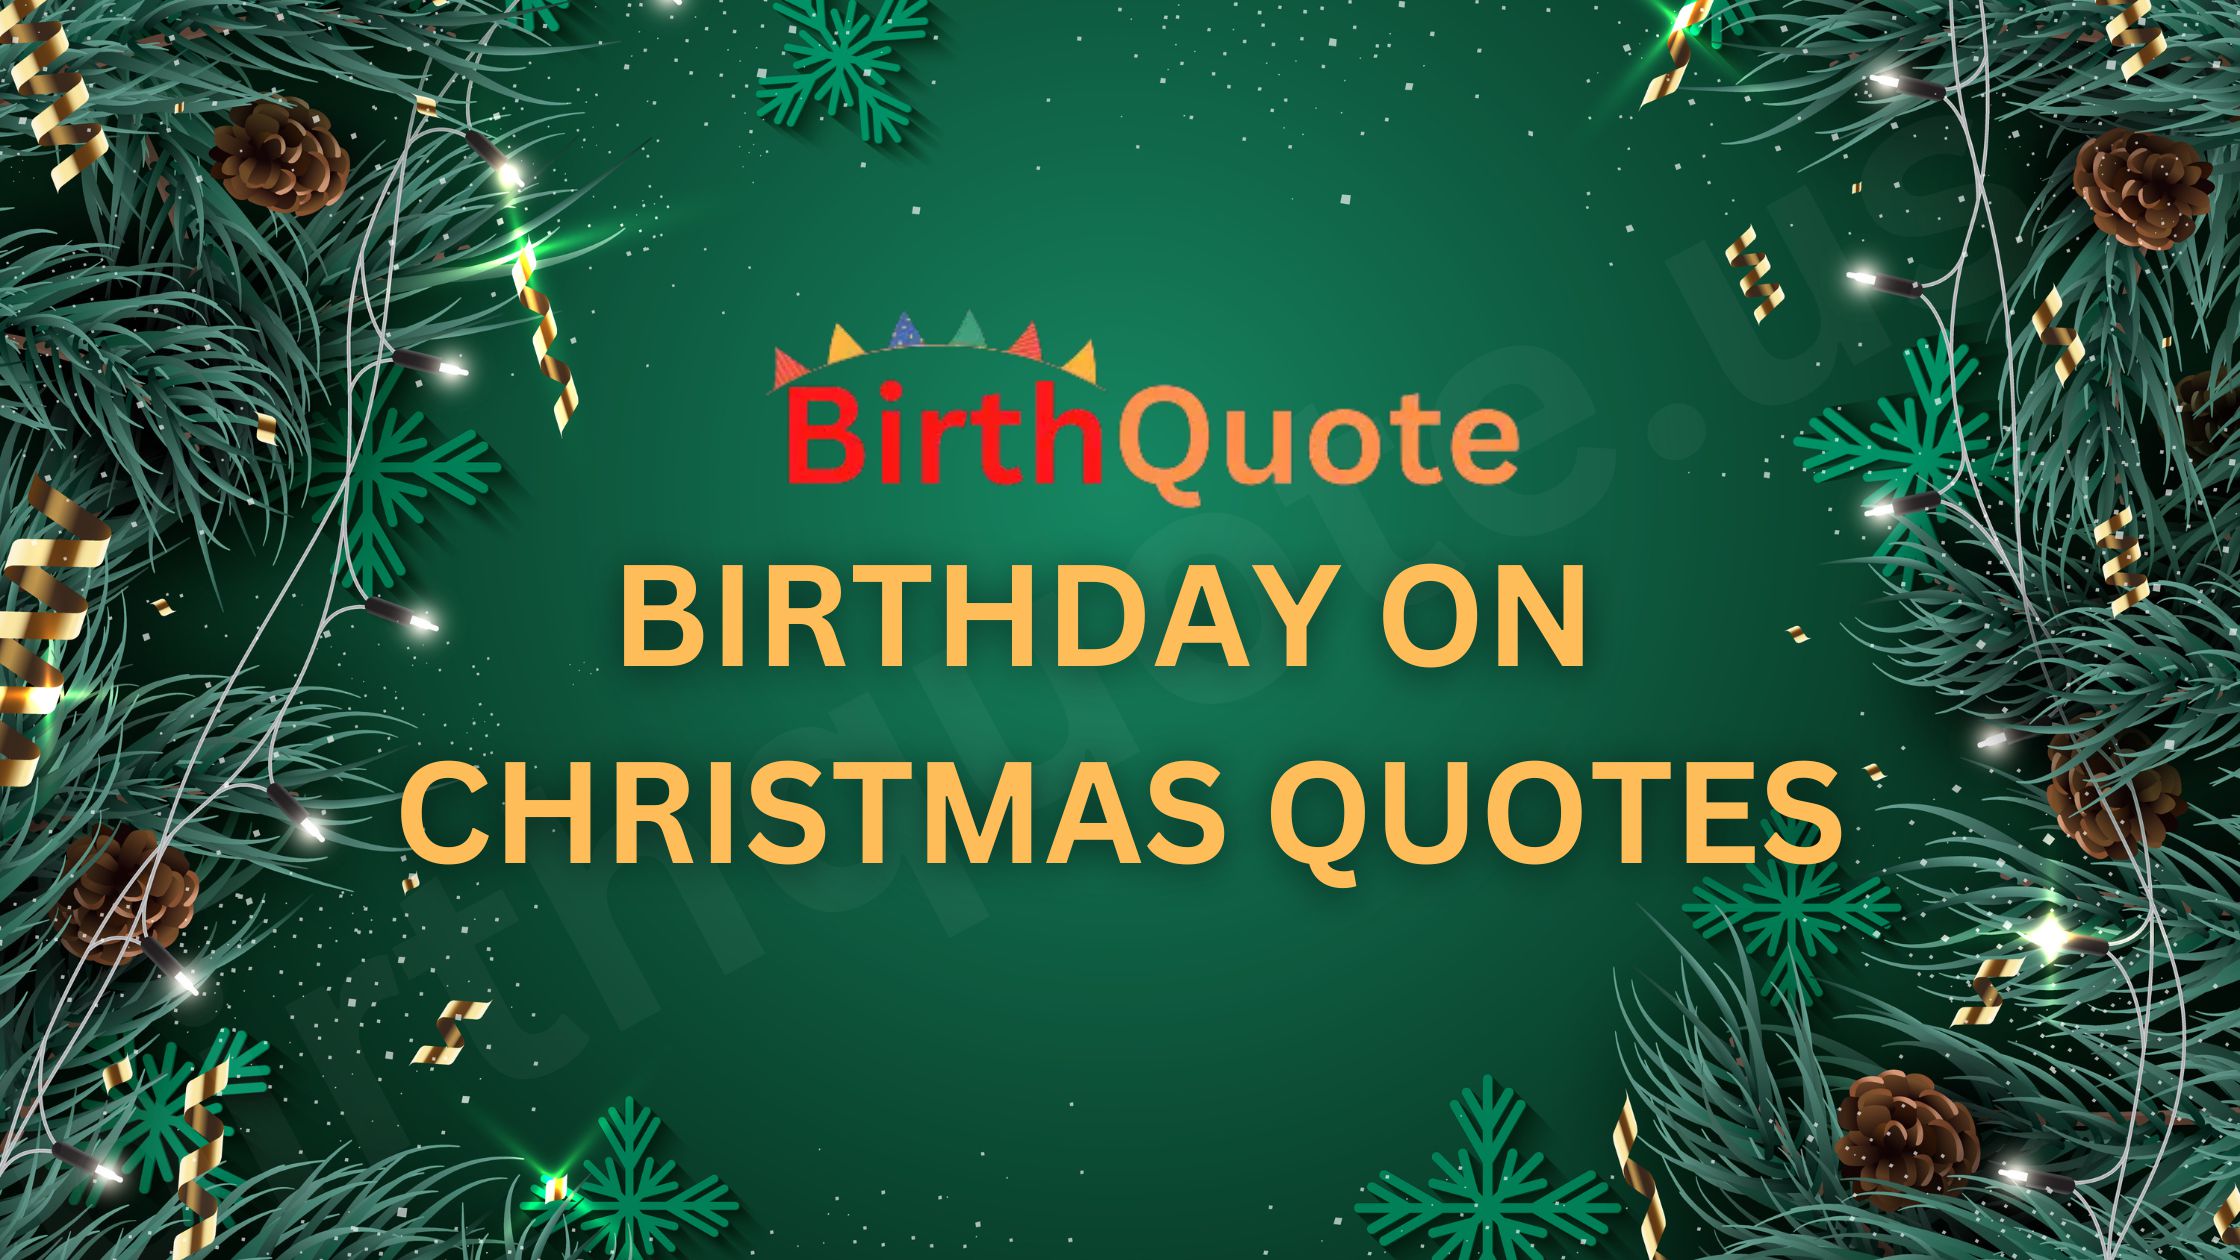 Birthday on Christmas Quotes